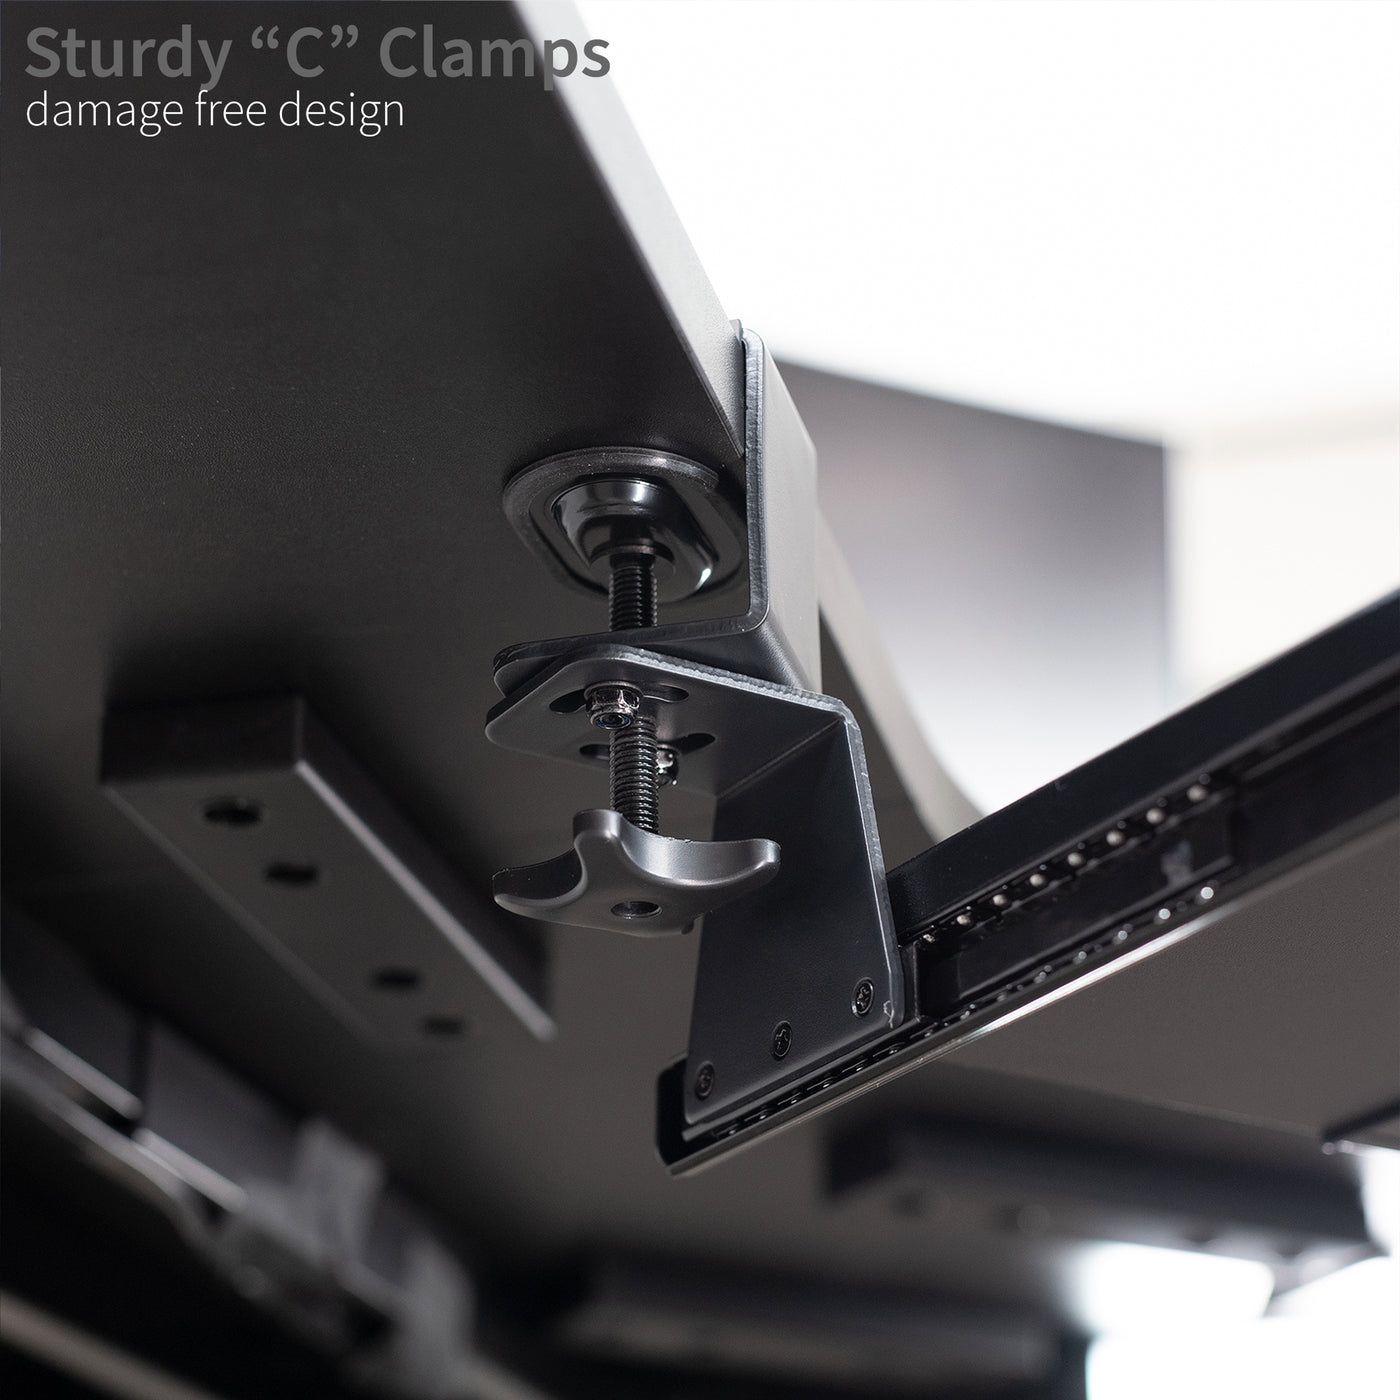 Clamp-on Keyboard Tray for Corner Desk